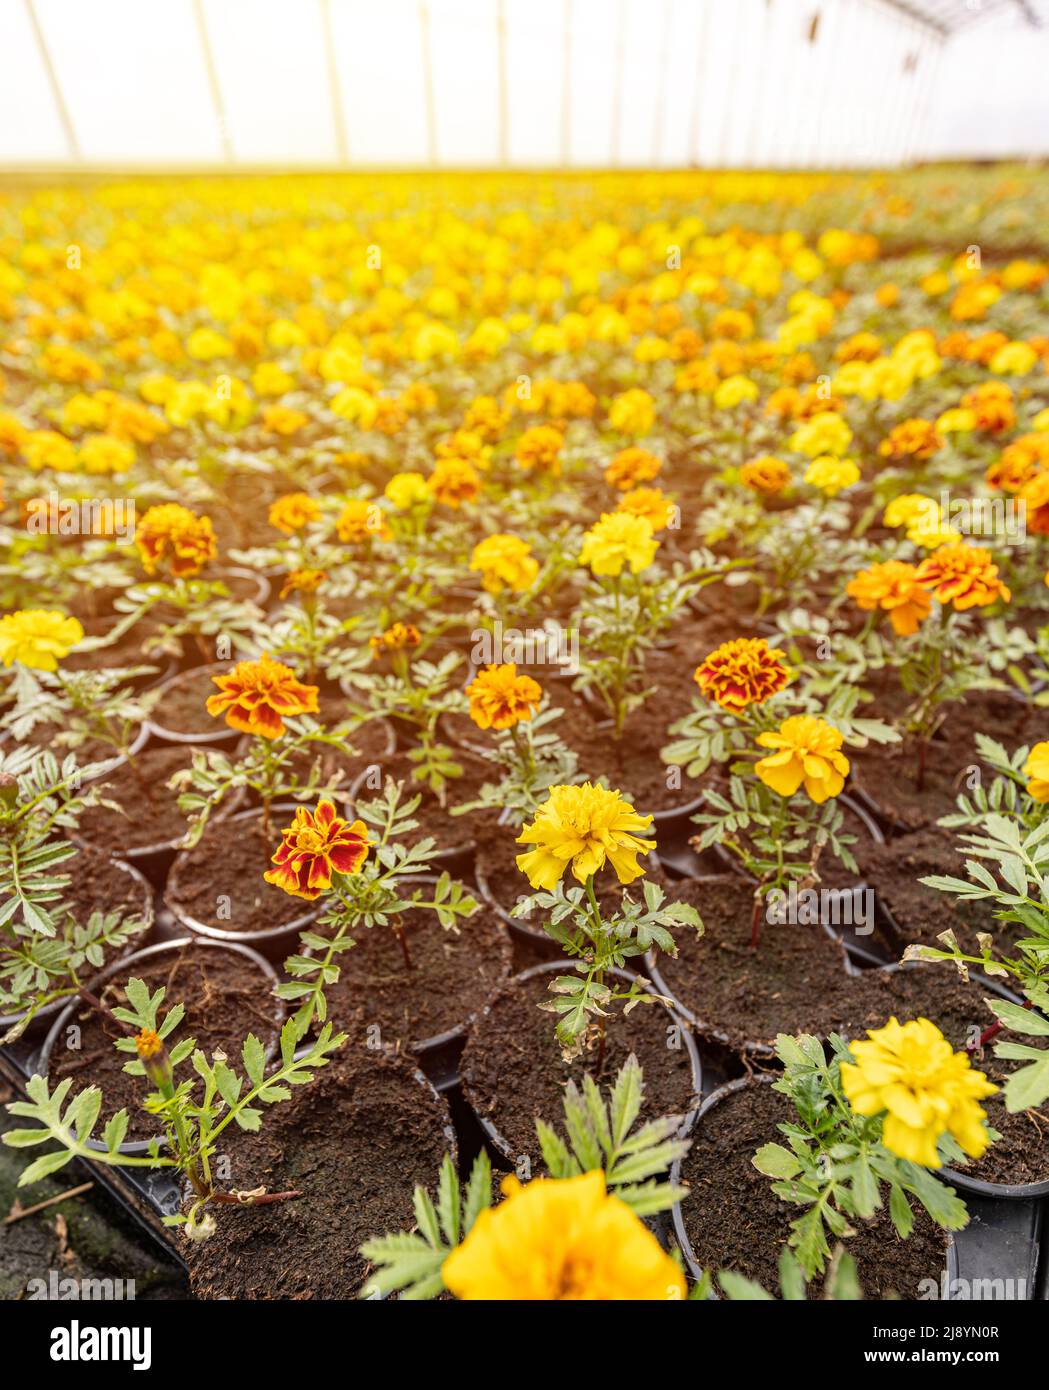 Tagetes in the plant nursery. Orange and yellow marigolds flower in glasshouse ready for sale Stock Photo